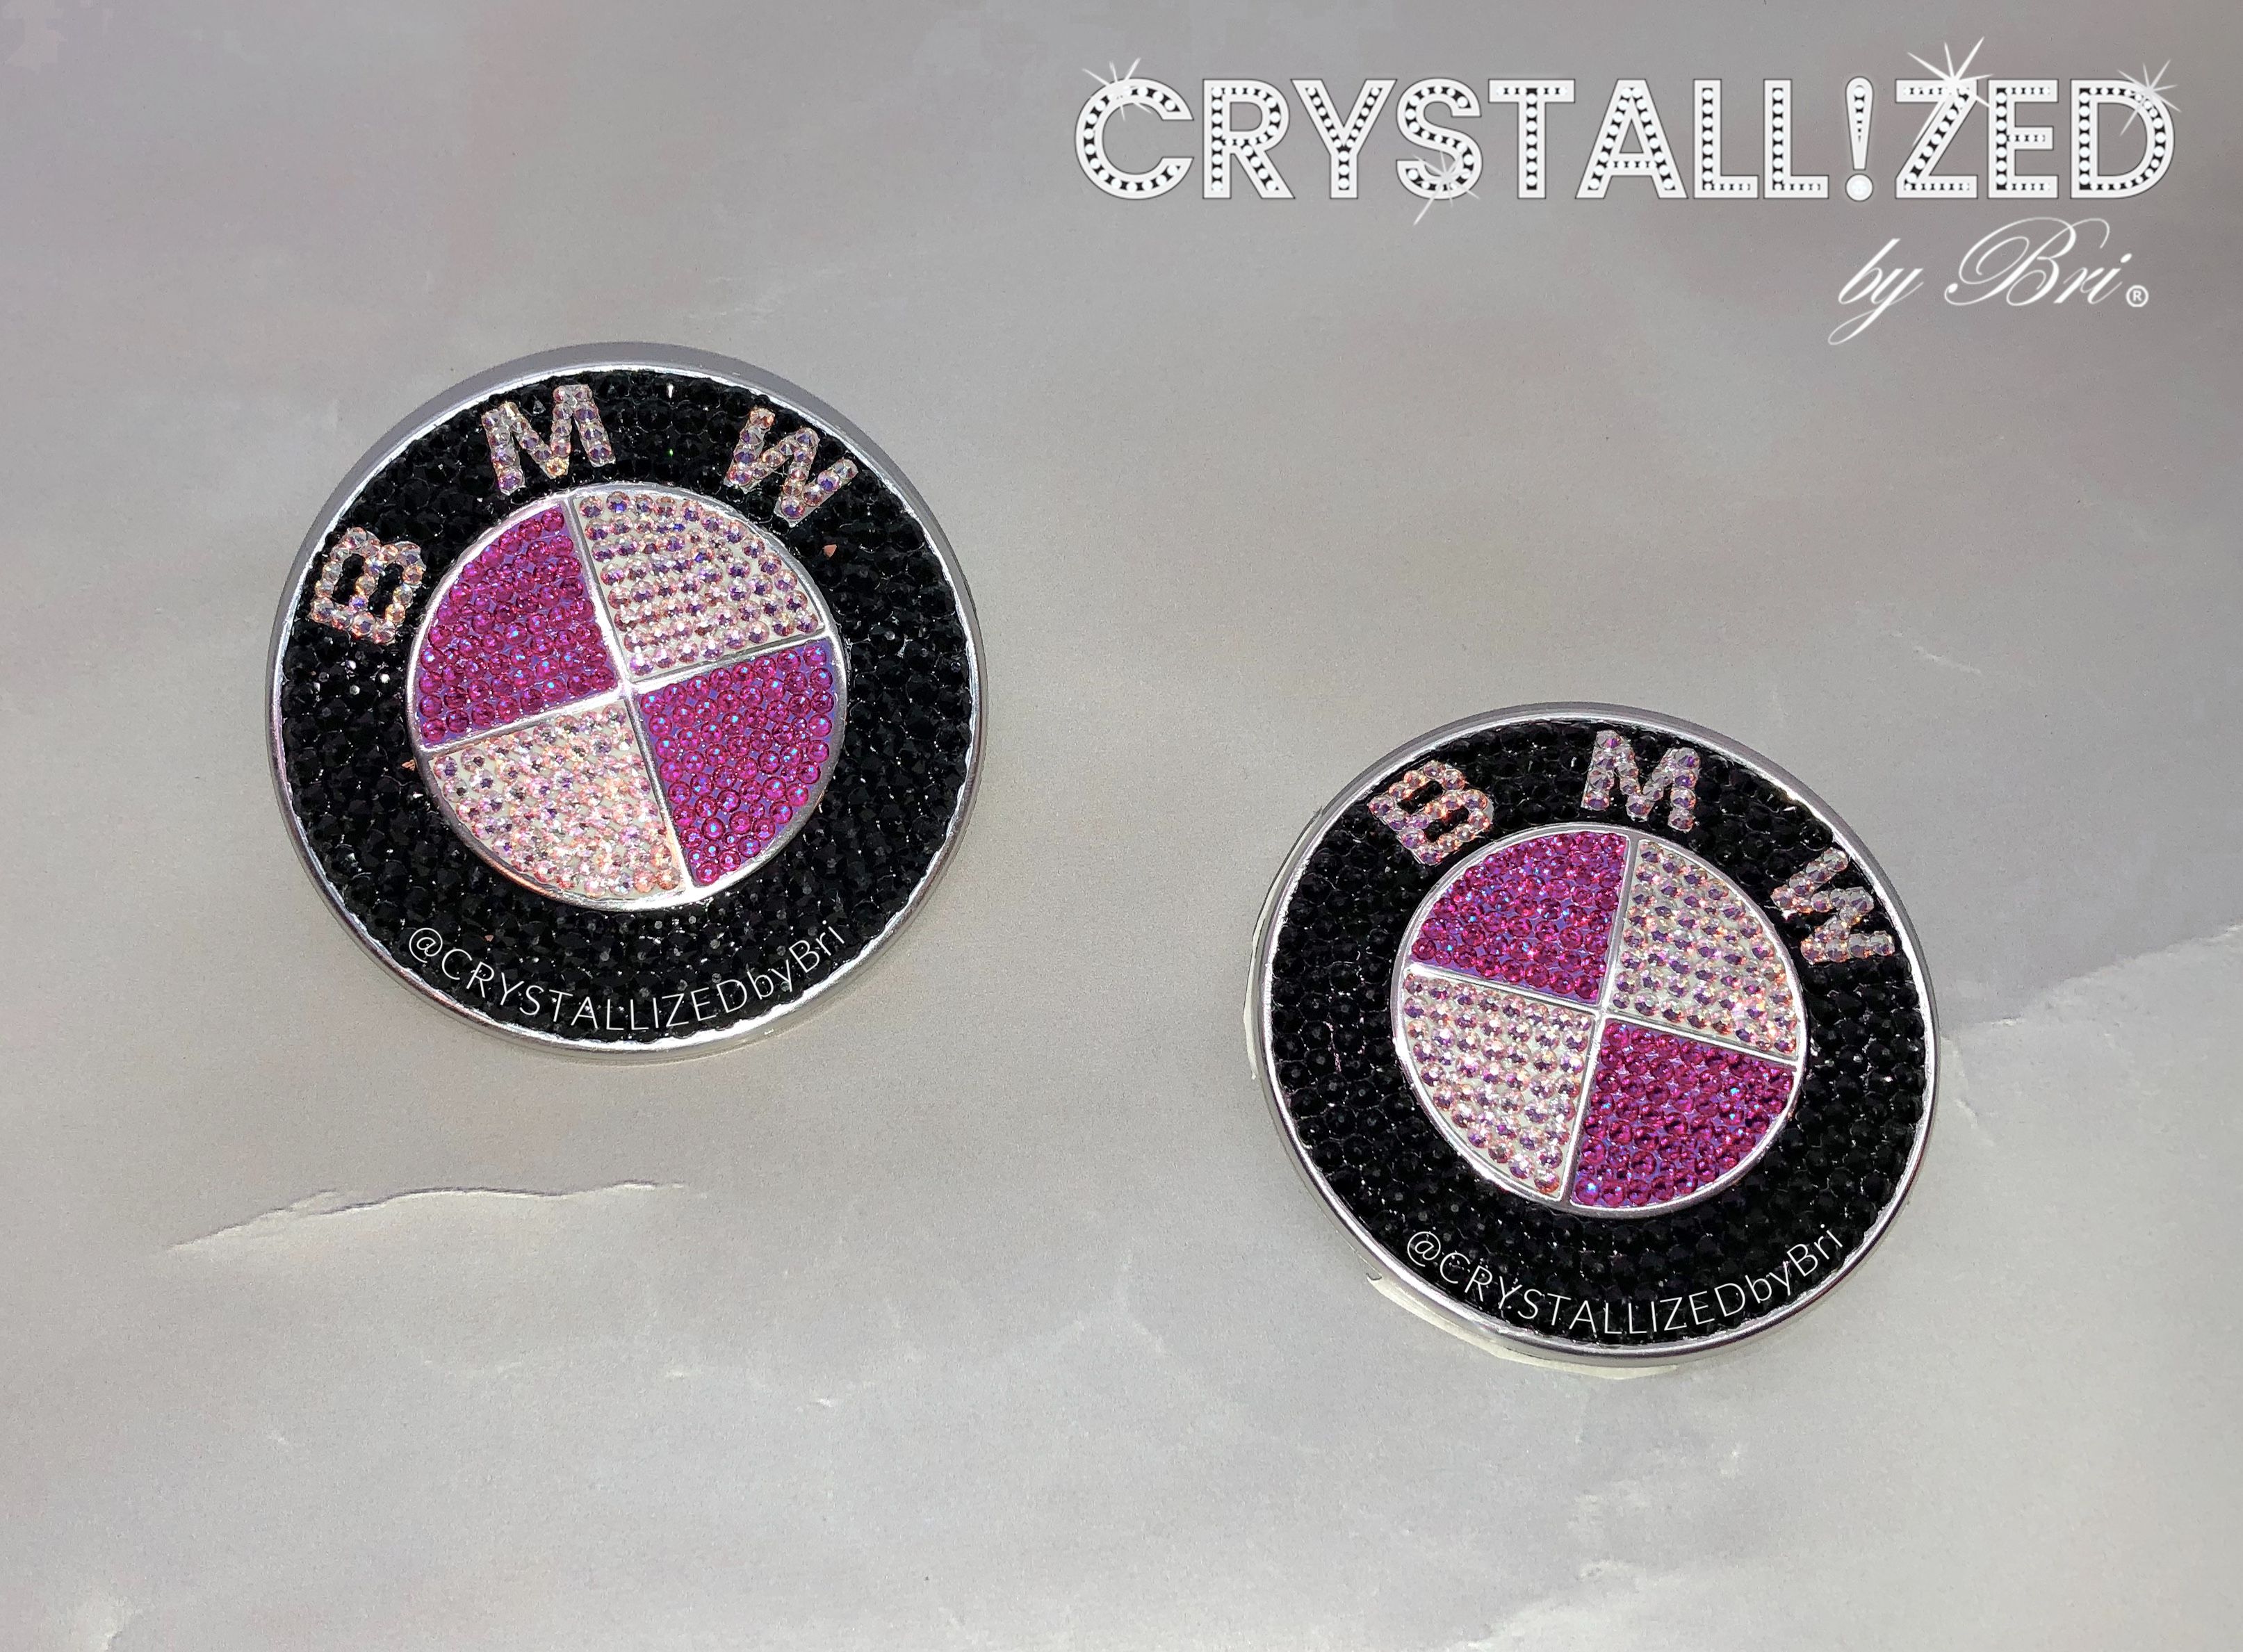 Buy Custom Pink Bmw Emblem With Genuine European Crystals Crystallized  Roundel Car Emblem Bling Bedazzled, made to order from CRYSTALL!ZED by Bri,  LLC